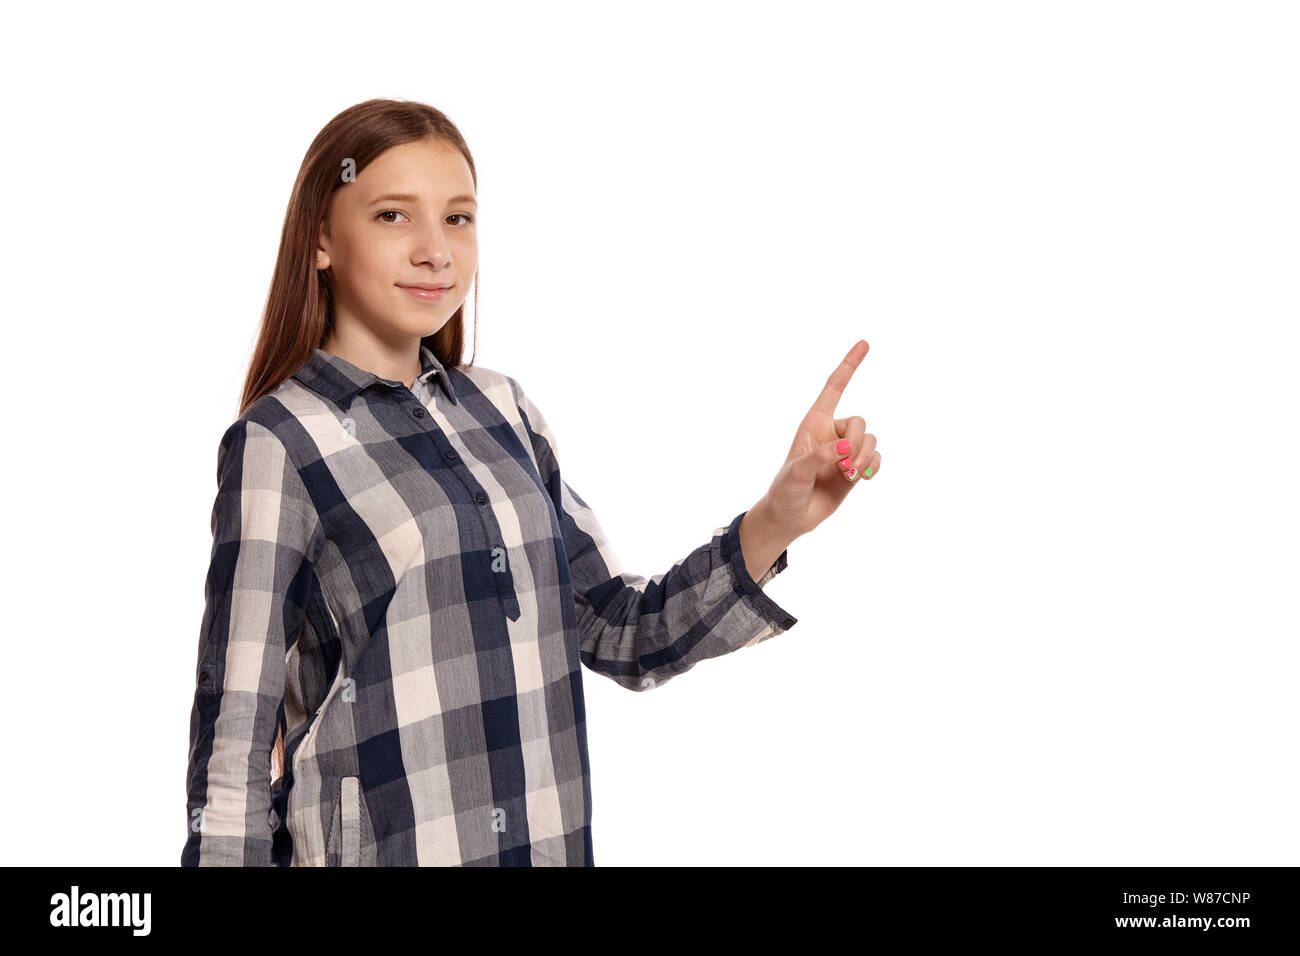 Beautiful teenage girl in a casual checkered shirt is posing isolated on white studio background. Stock Photo